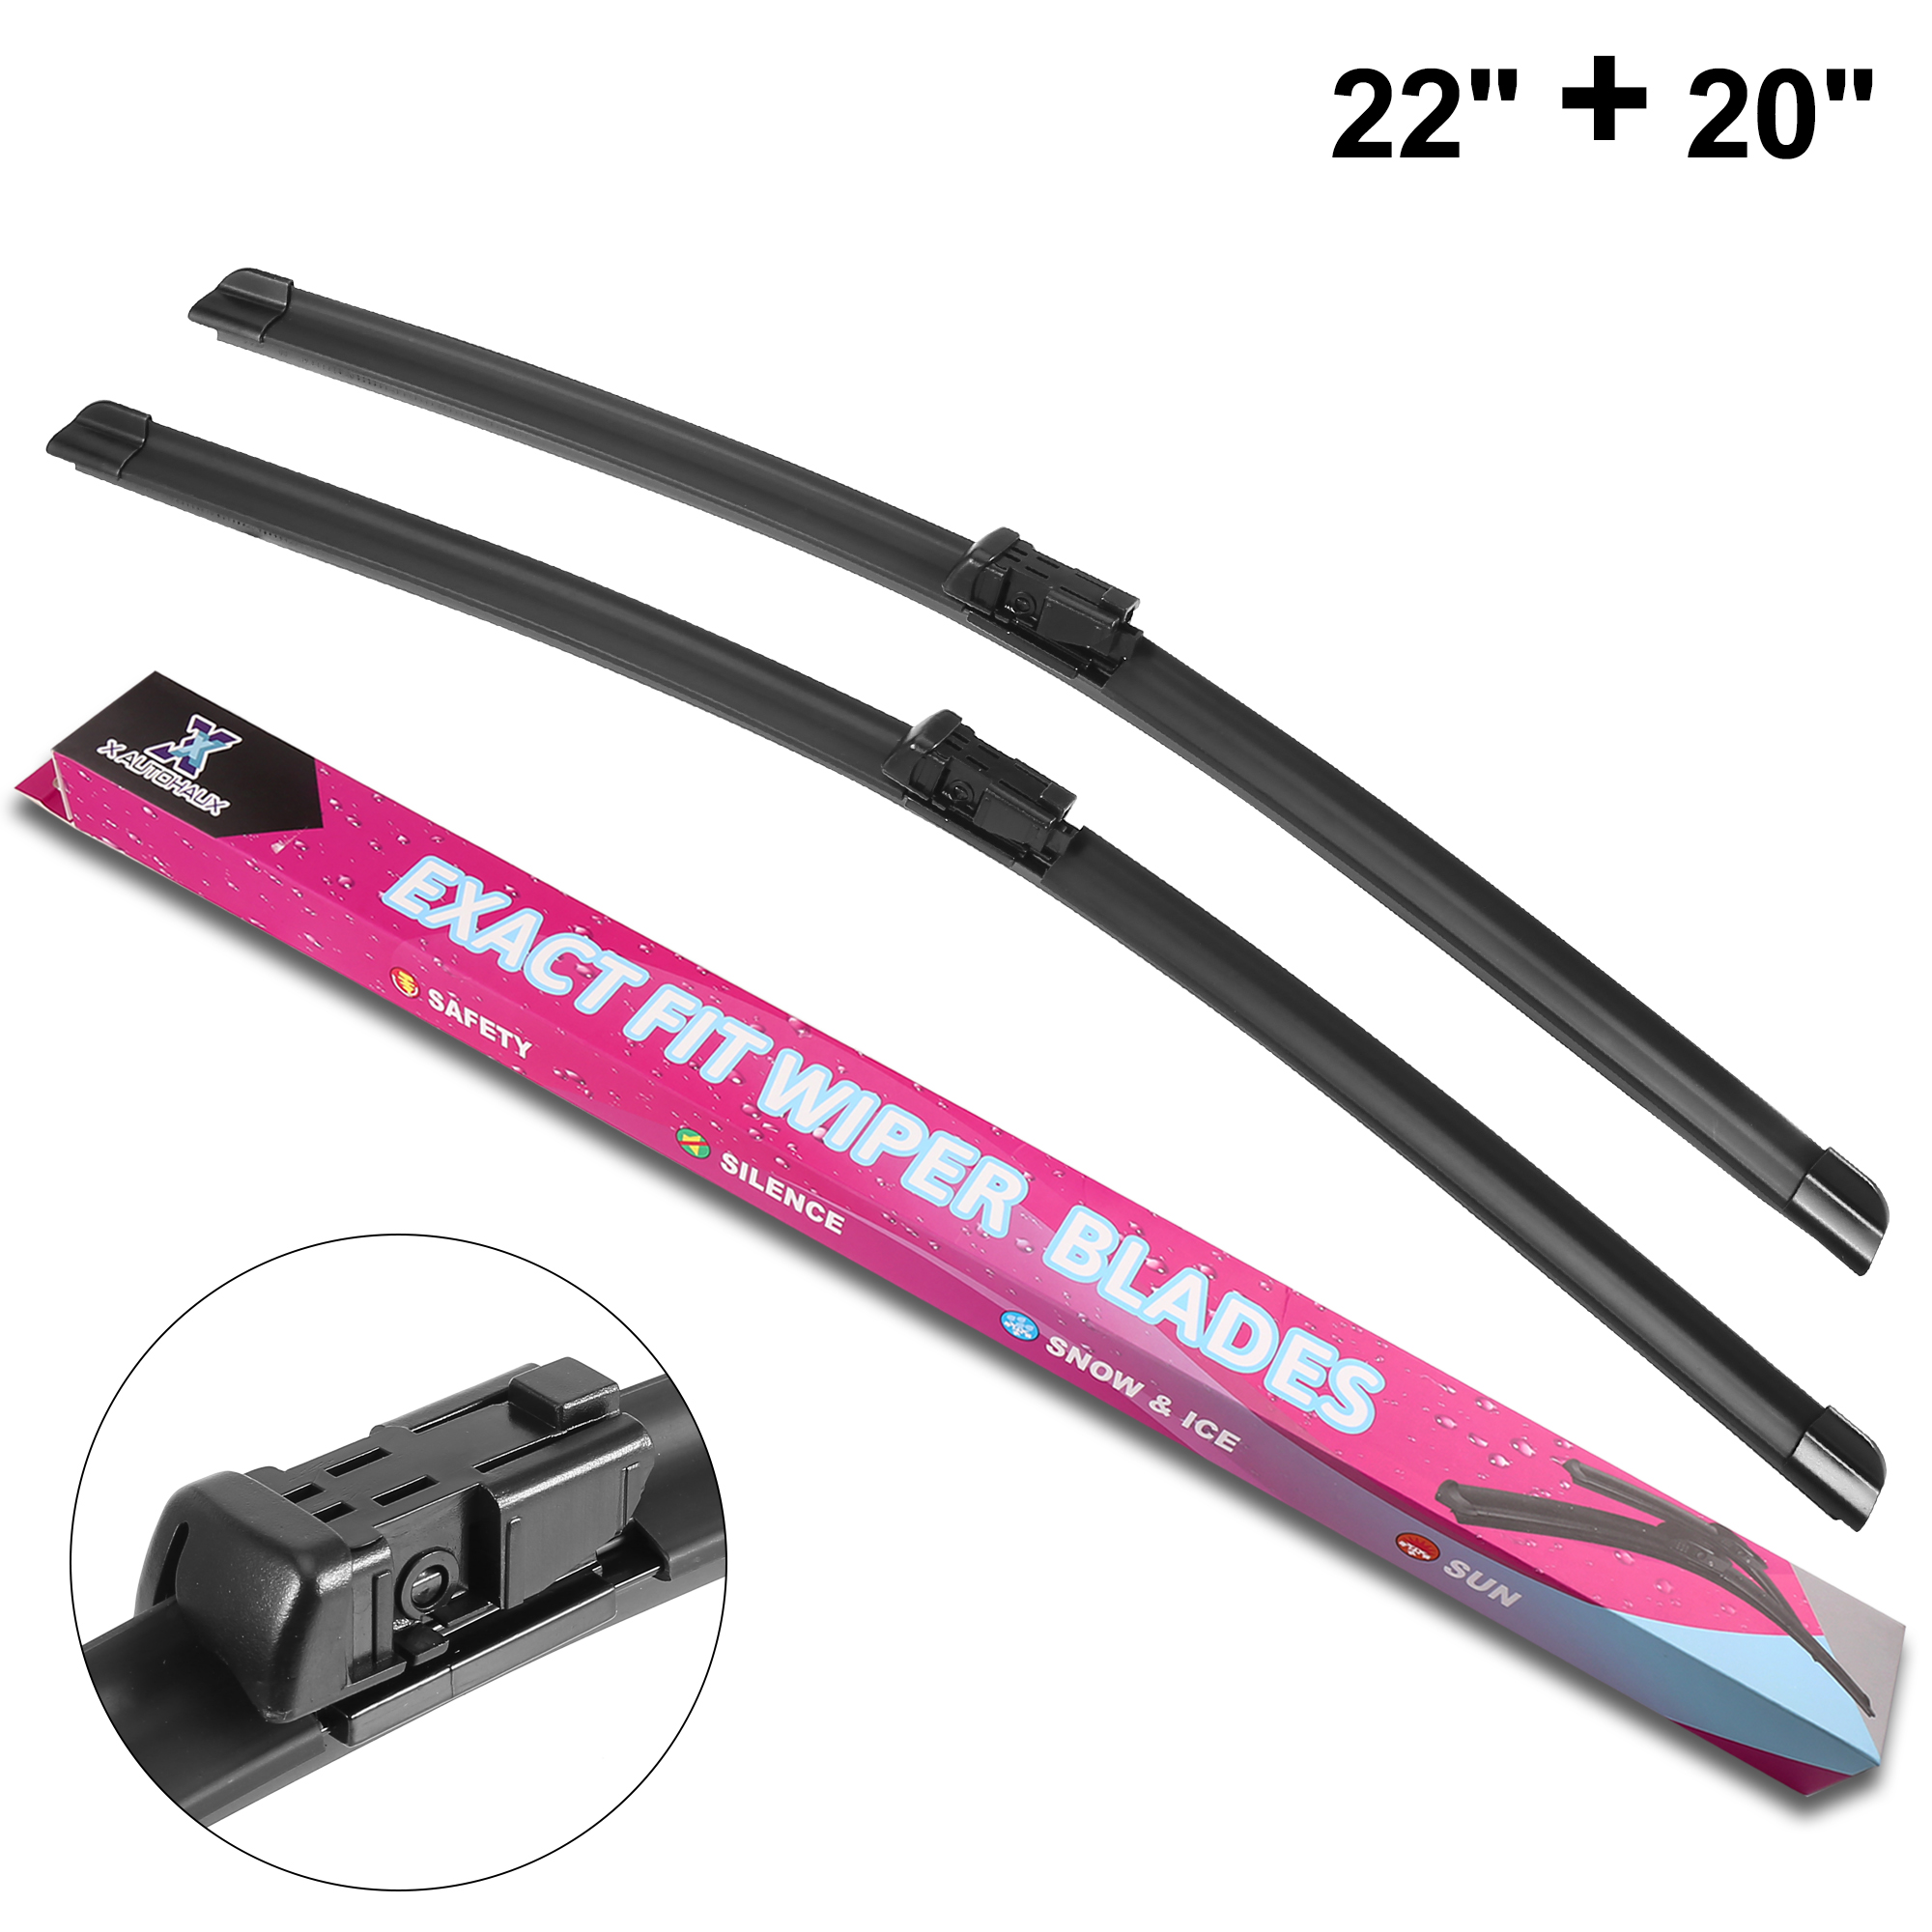 Unique Bargains Front Windshield Wiper Blades for Jeep Renegade BU 15-20 22 inch + 20 inch